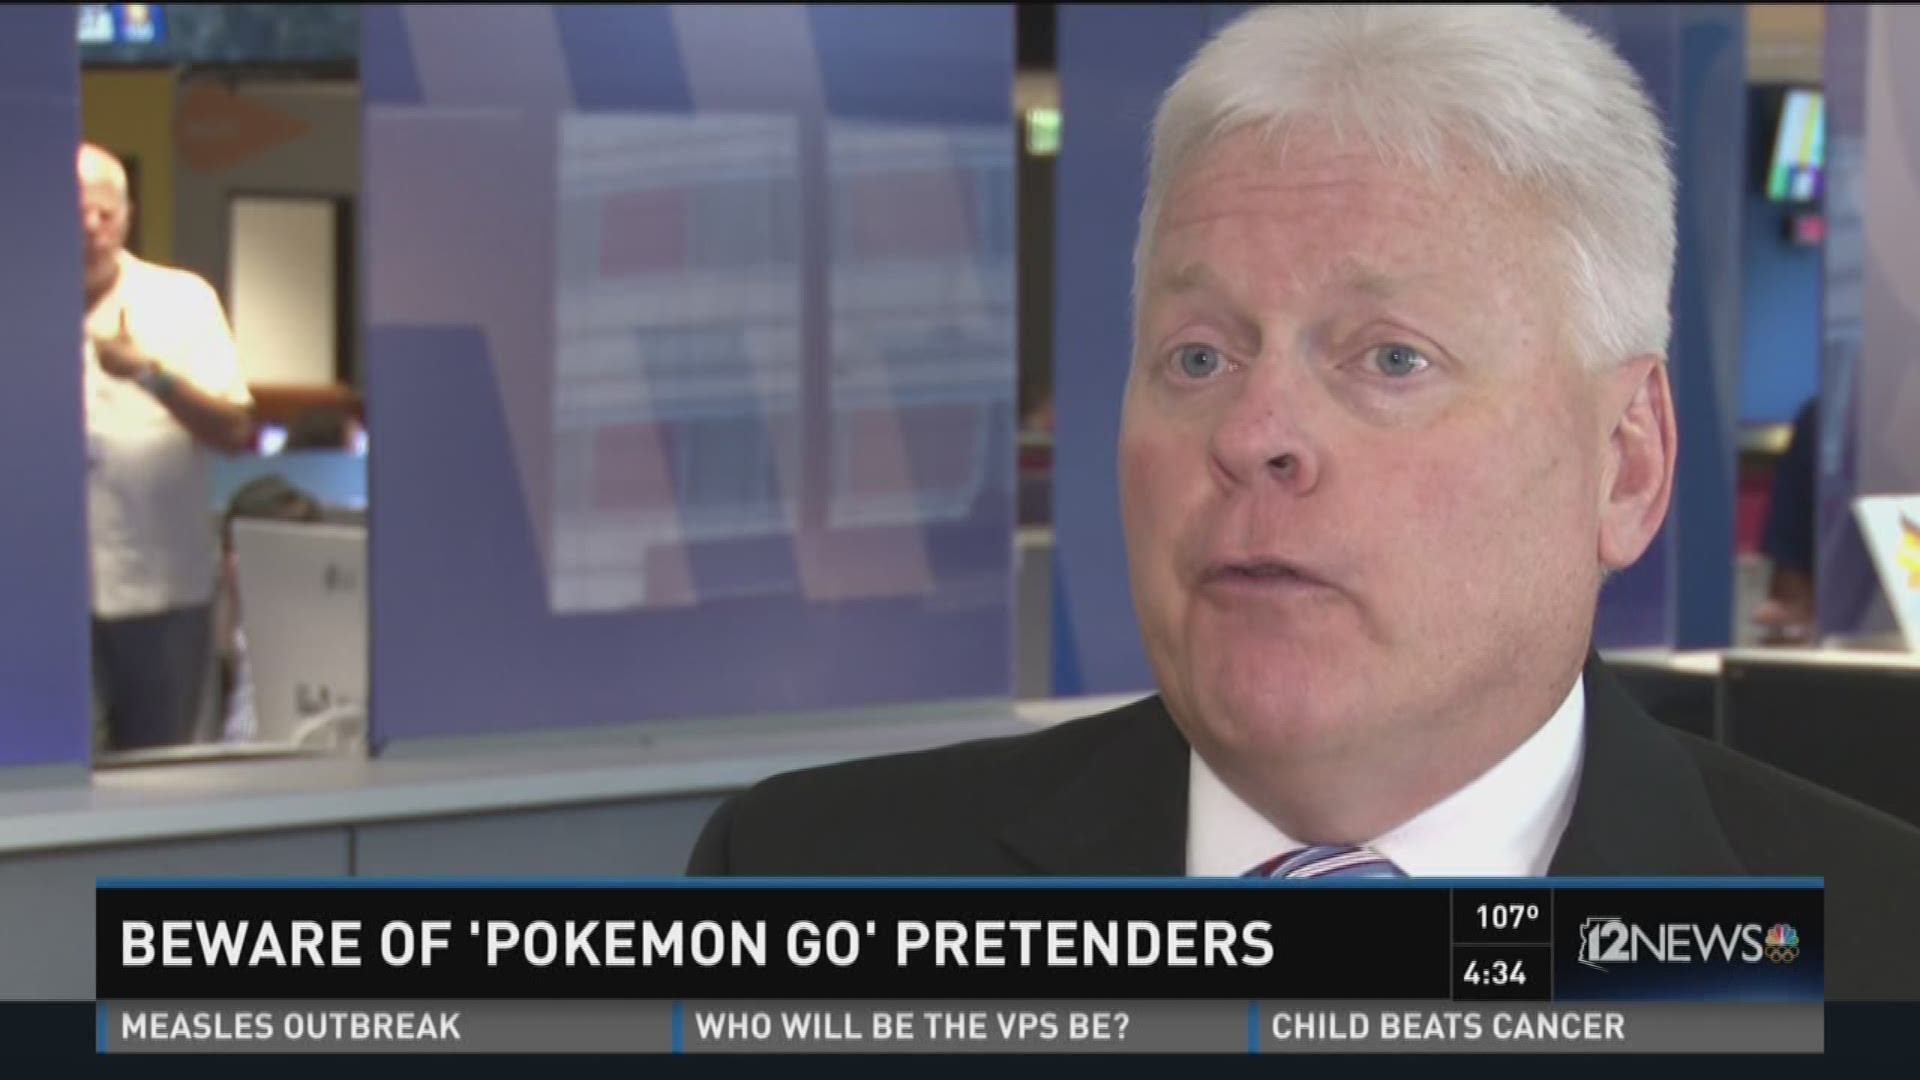 The popularity of the new 'Pokemon Go' app is causing security concerns.